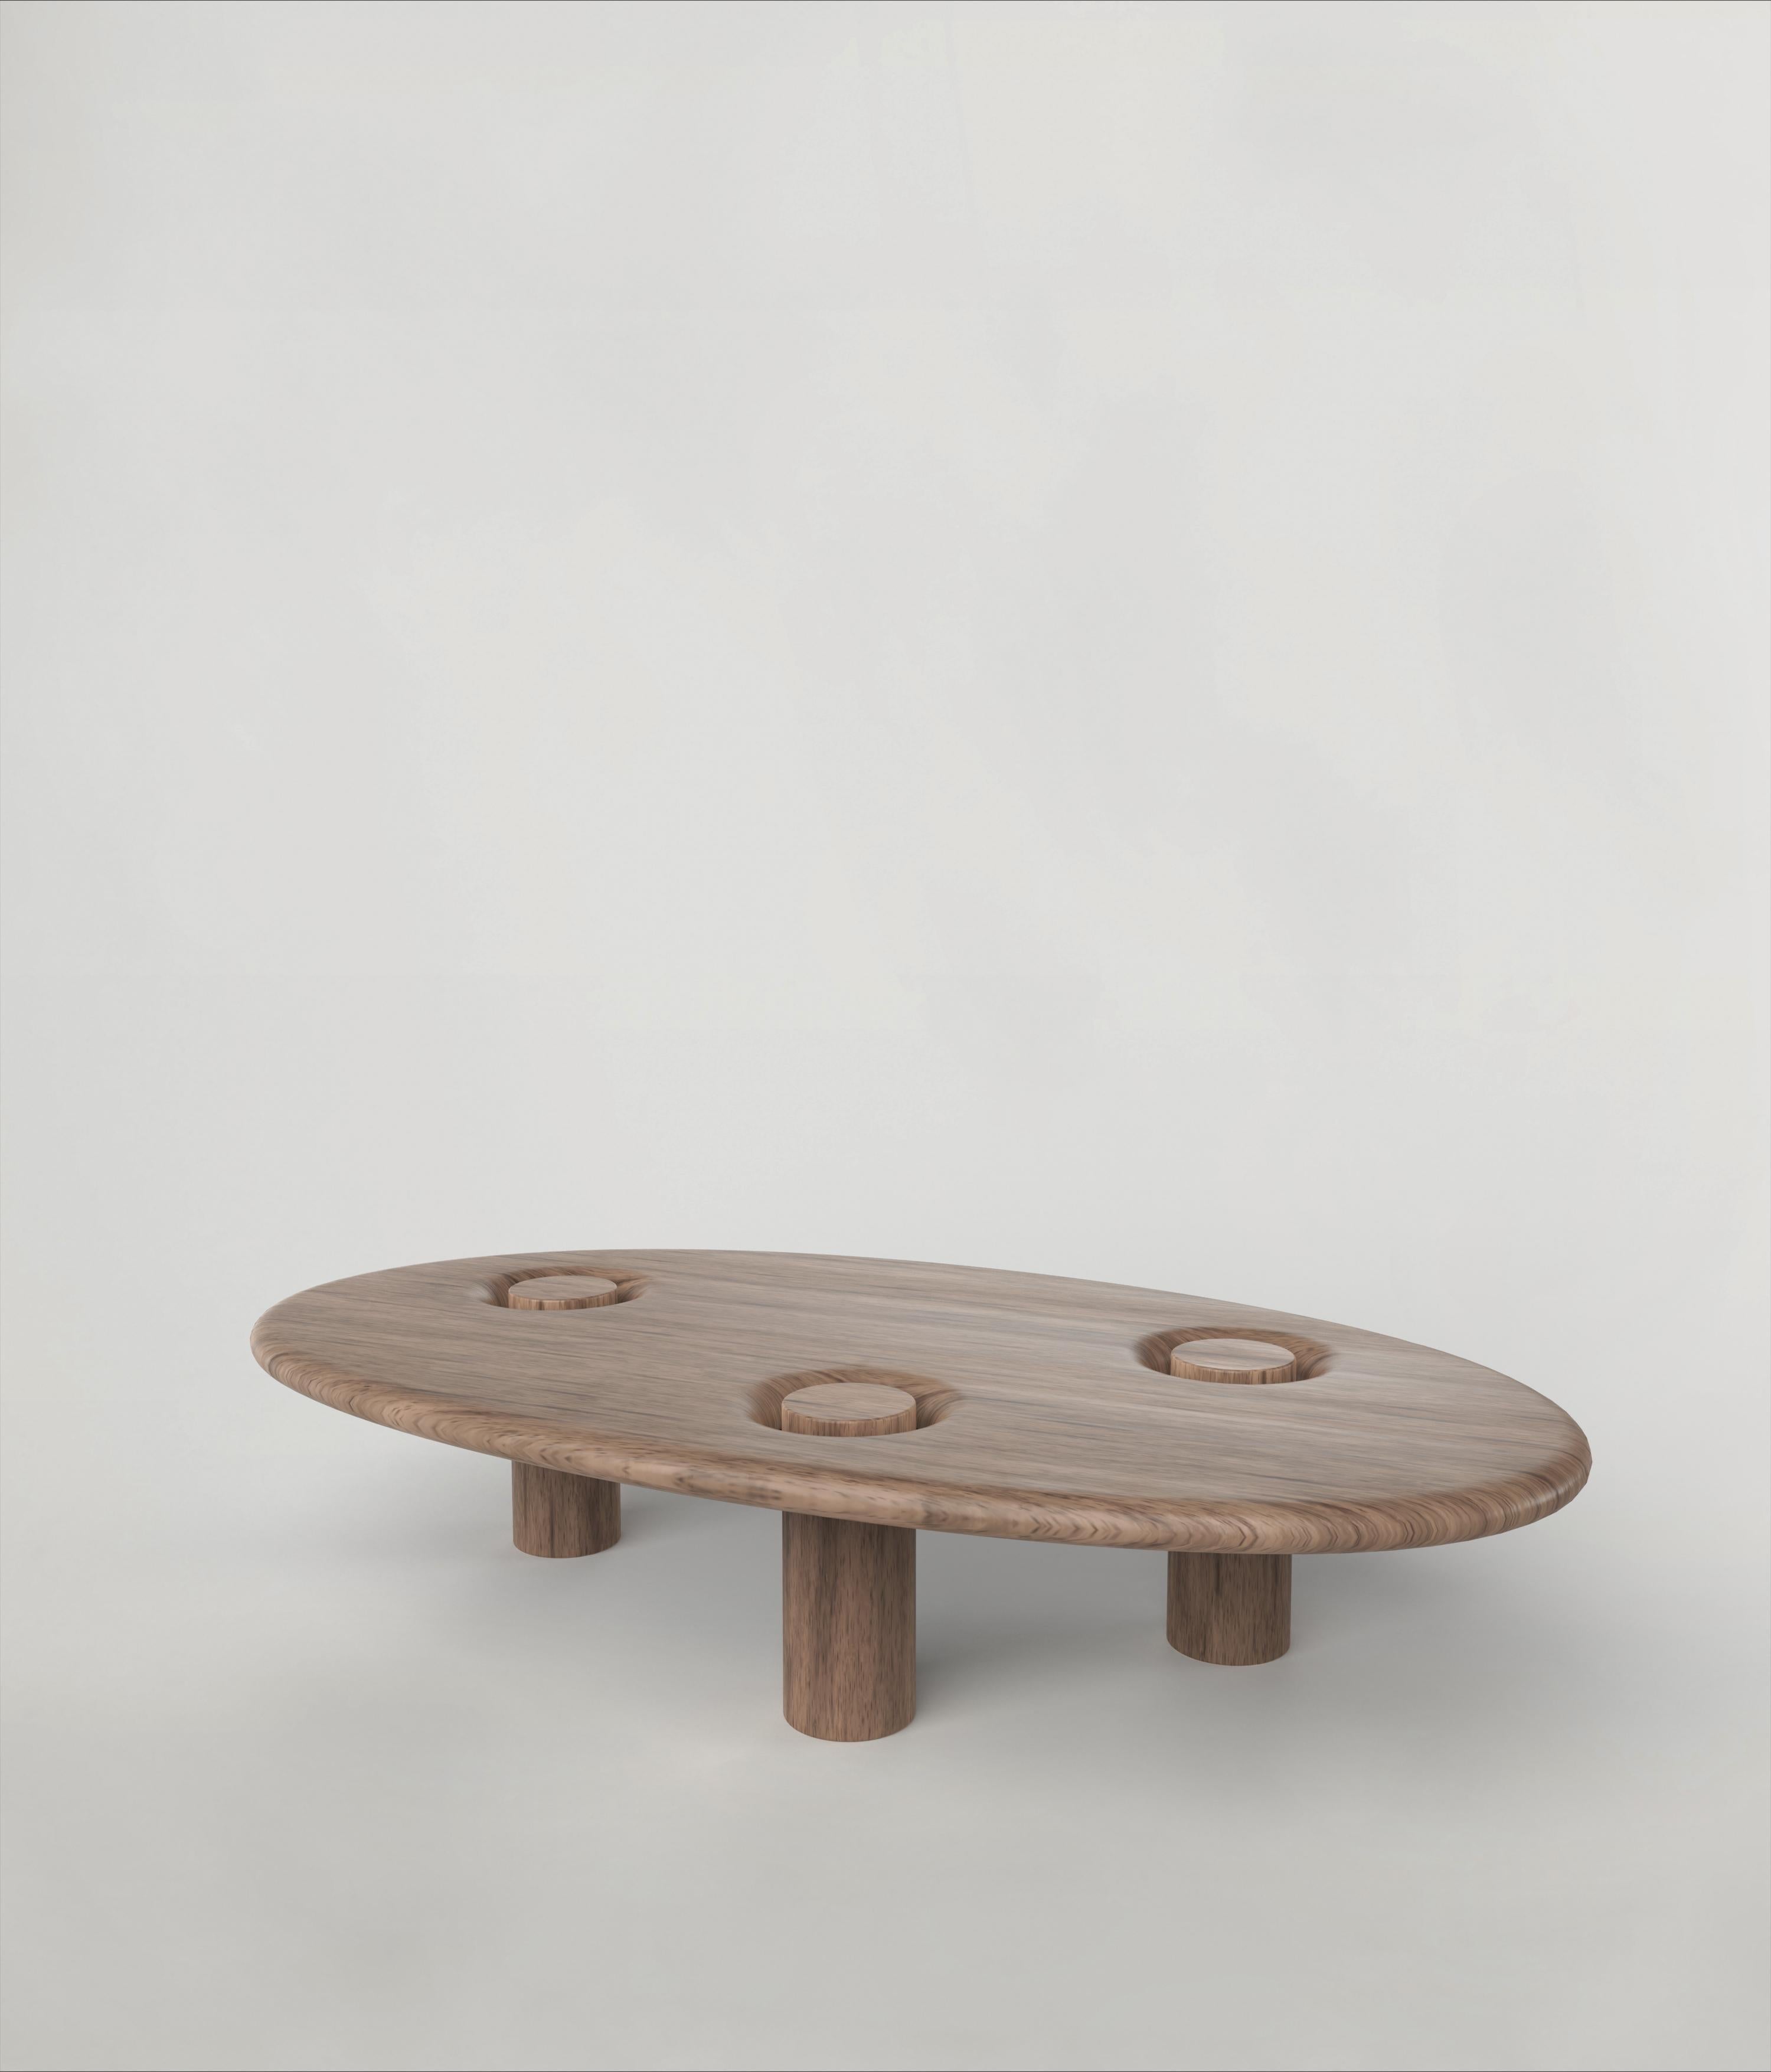 Asido V2 low table by Edizione Limitata
Limited edition of 150. Signed and numbered.
Dimensions: D 137 x W 78 x H 29 cm.
Materials: solid ash wood

The collectible design language Asido has been developed by the Edizione Limitata’s art research